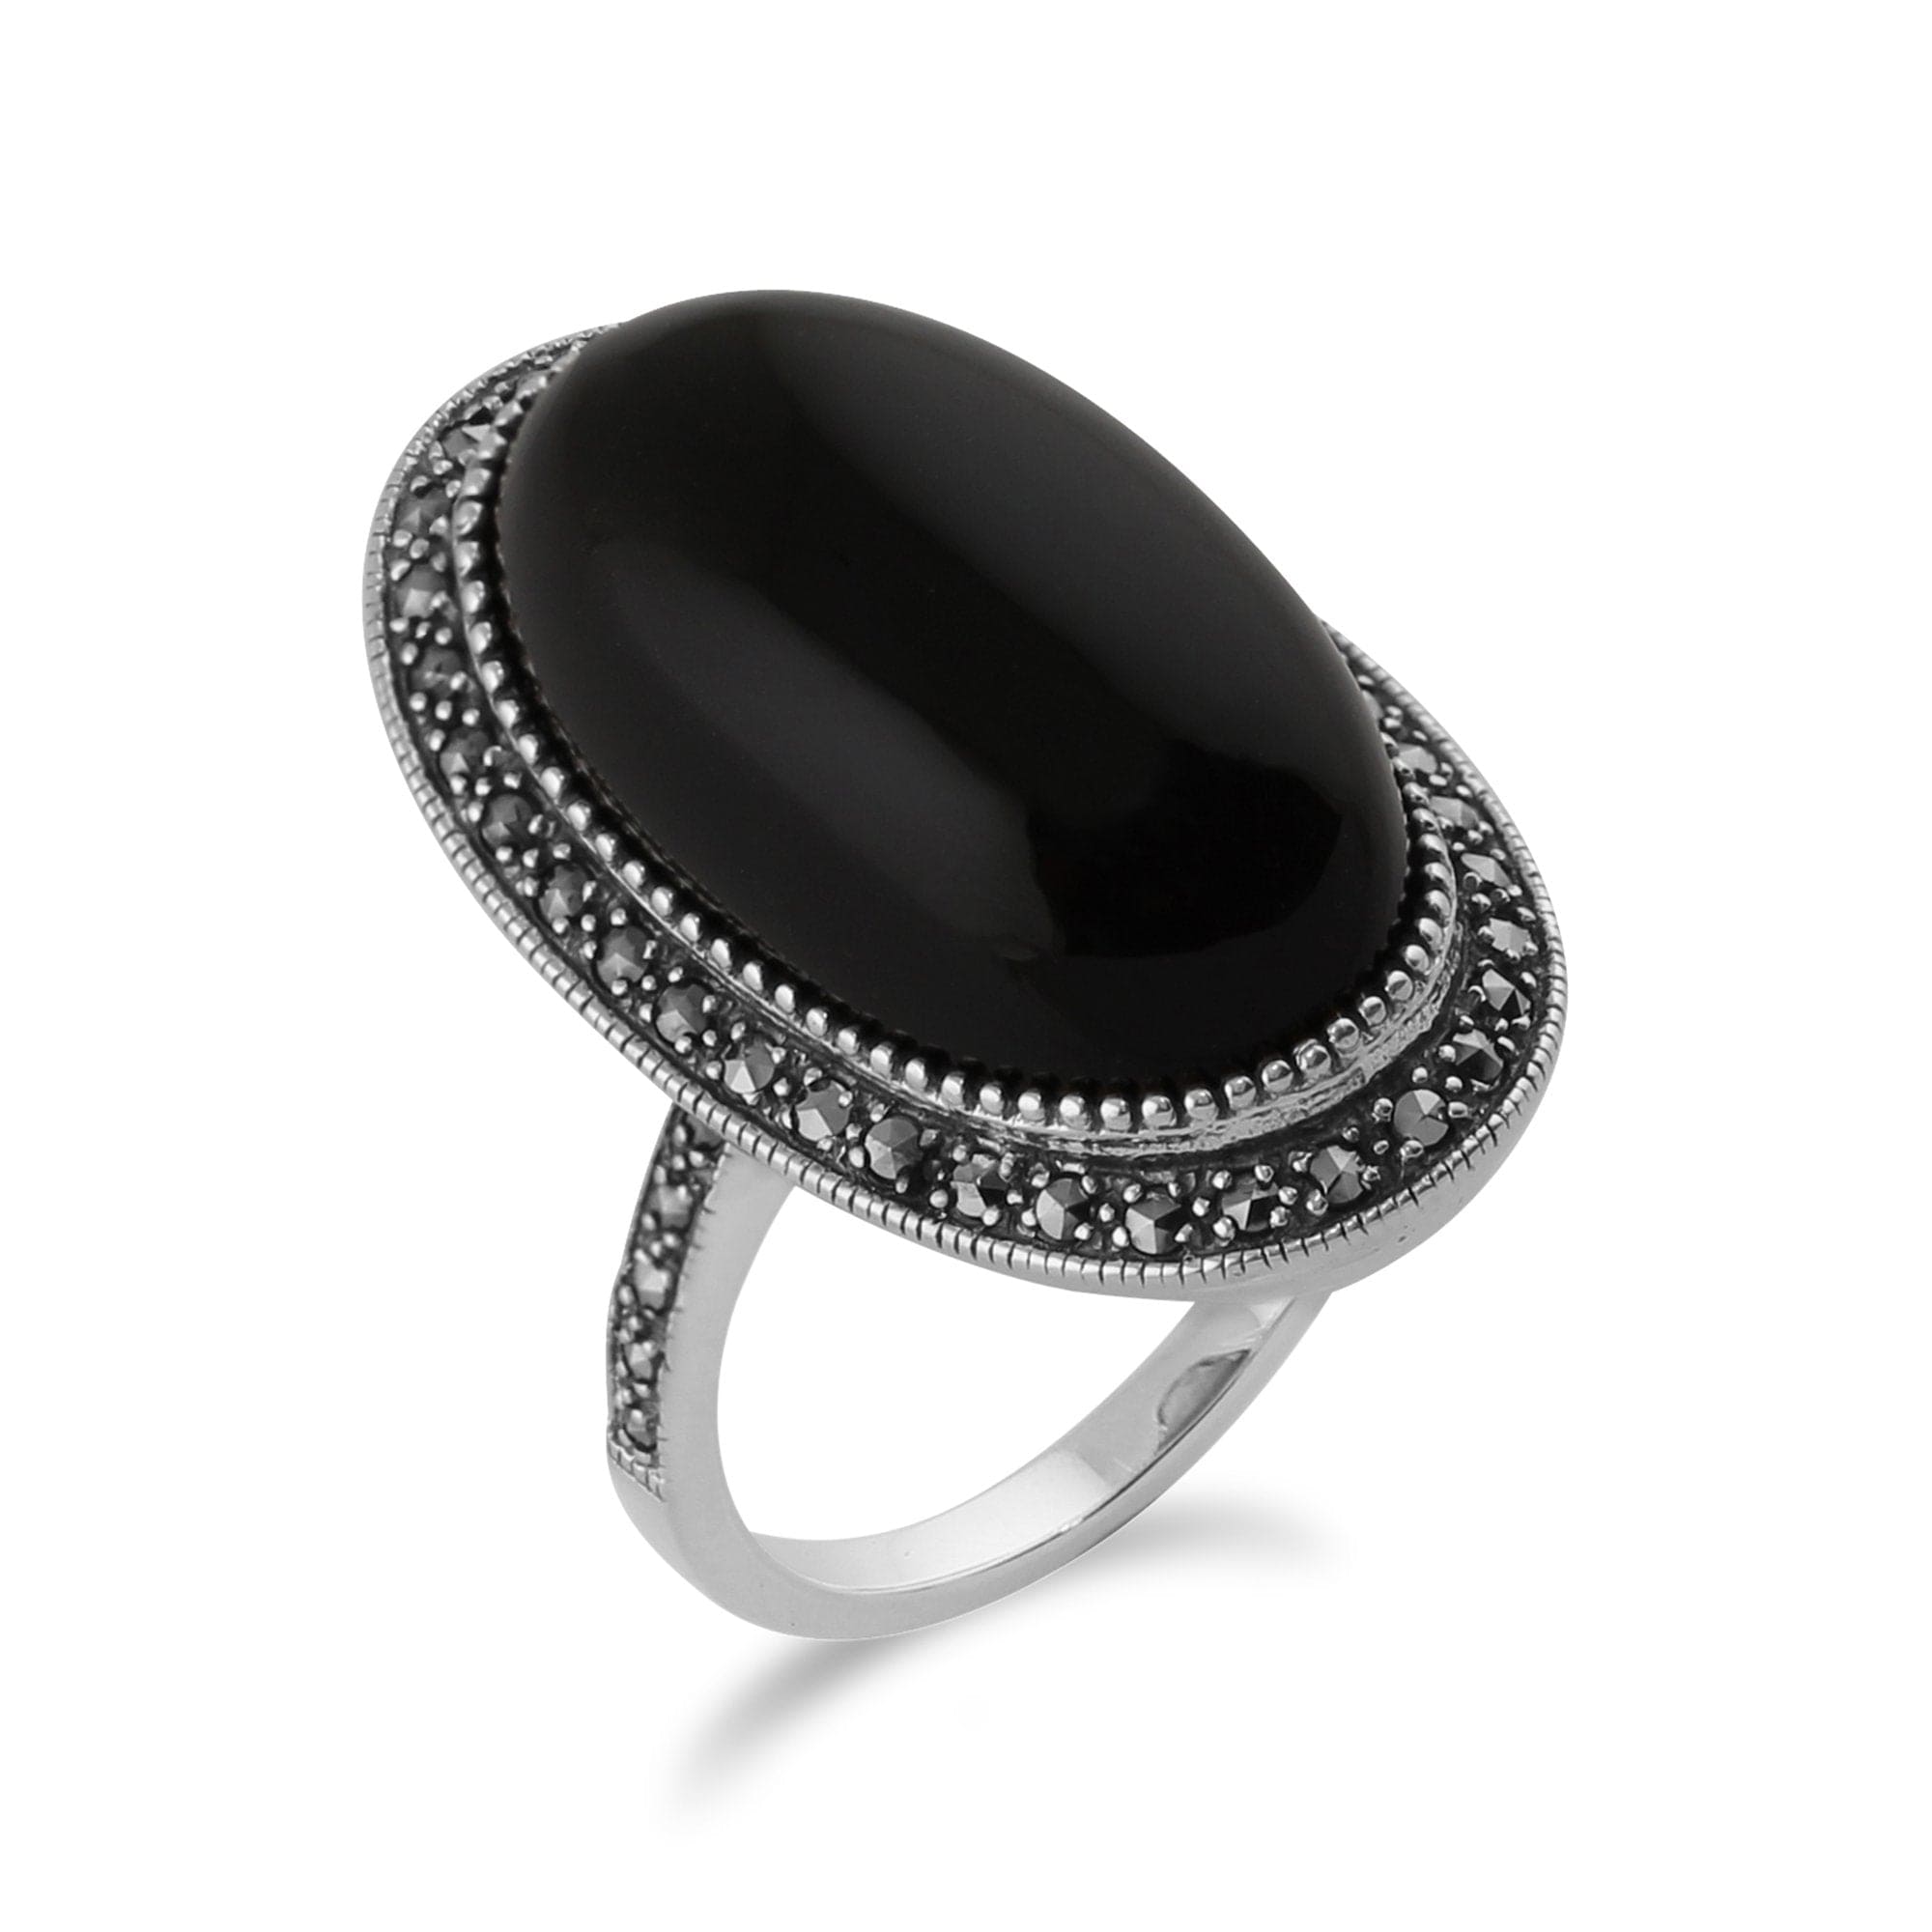 214R434301925 Art Deco Style Black Onyx Cabochon & Marcasite Cocktail Ring 4